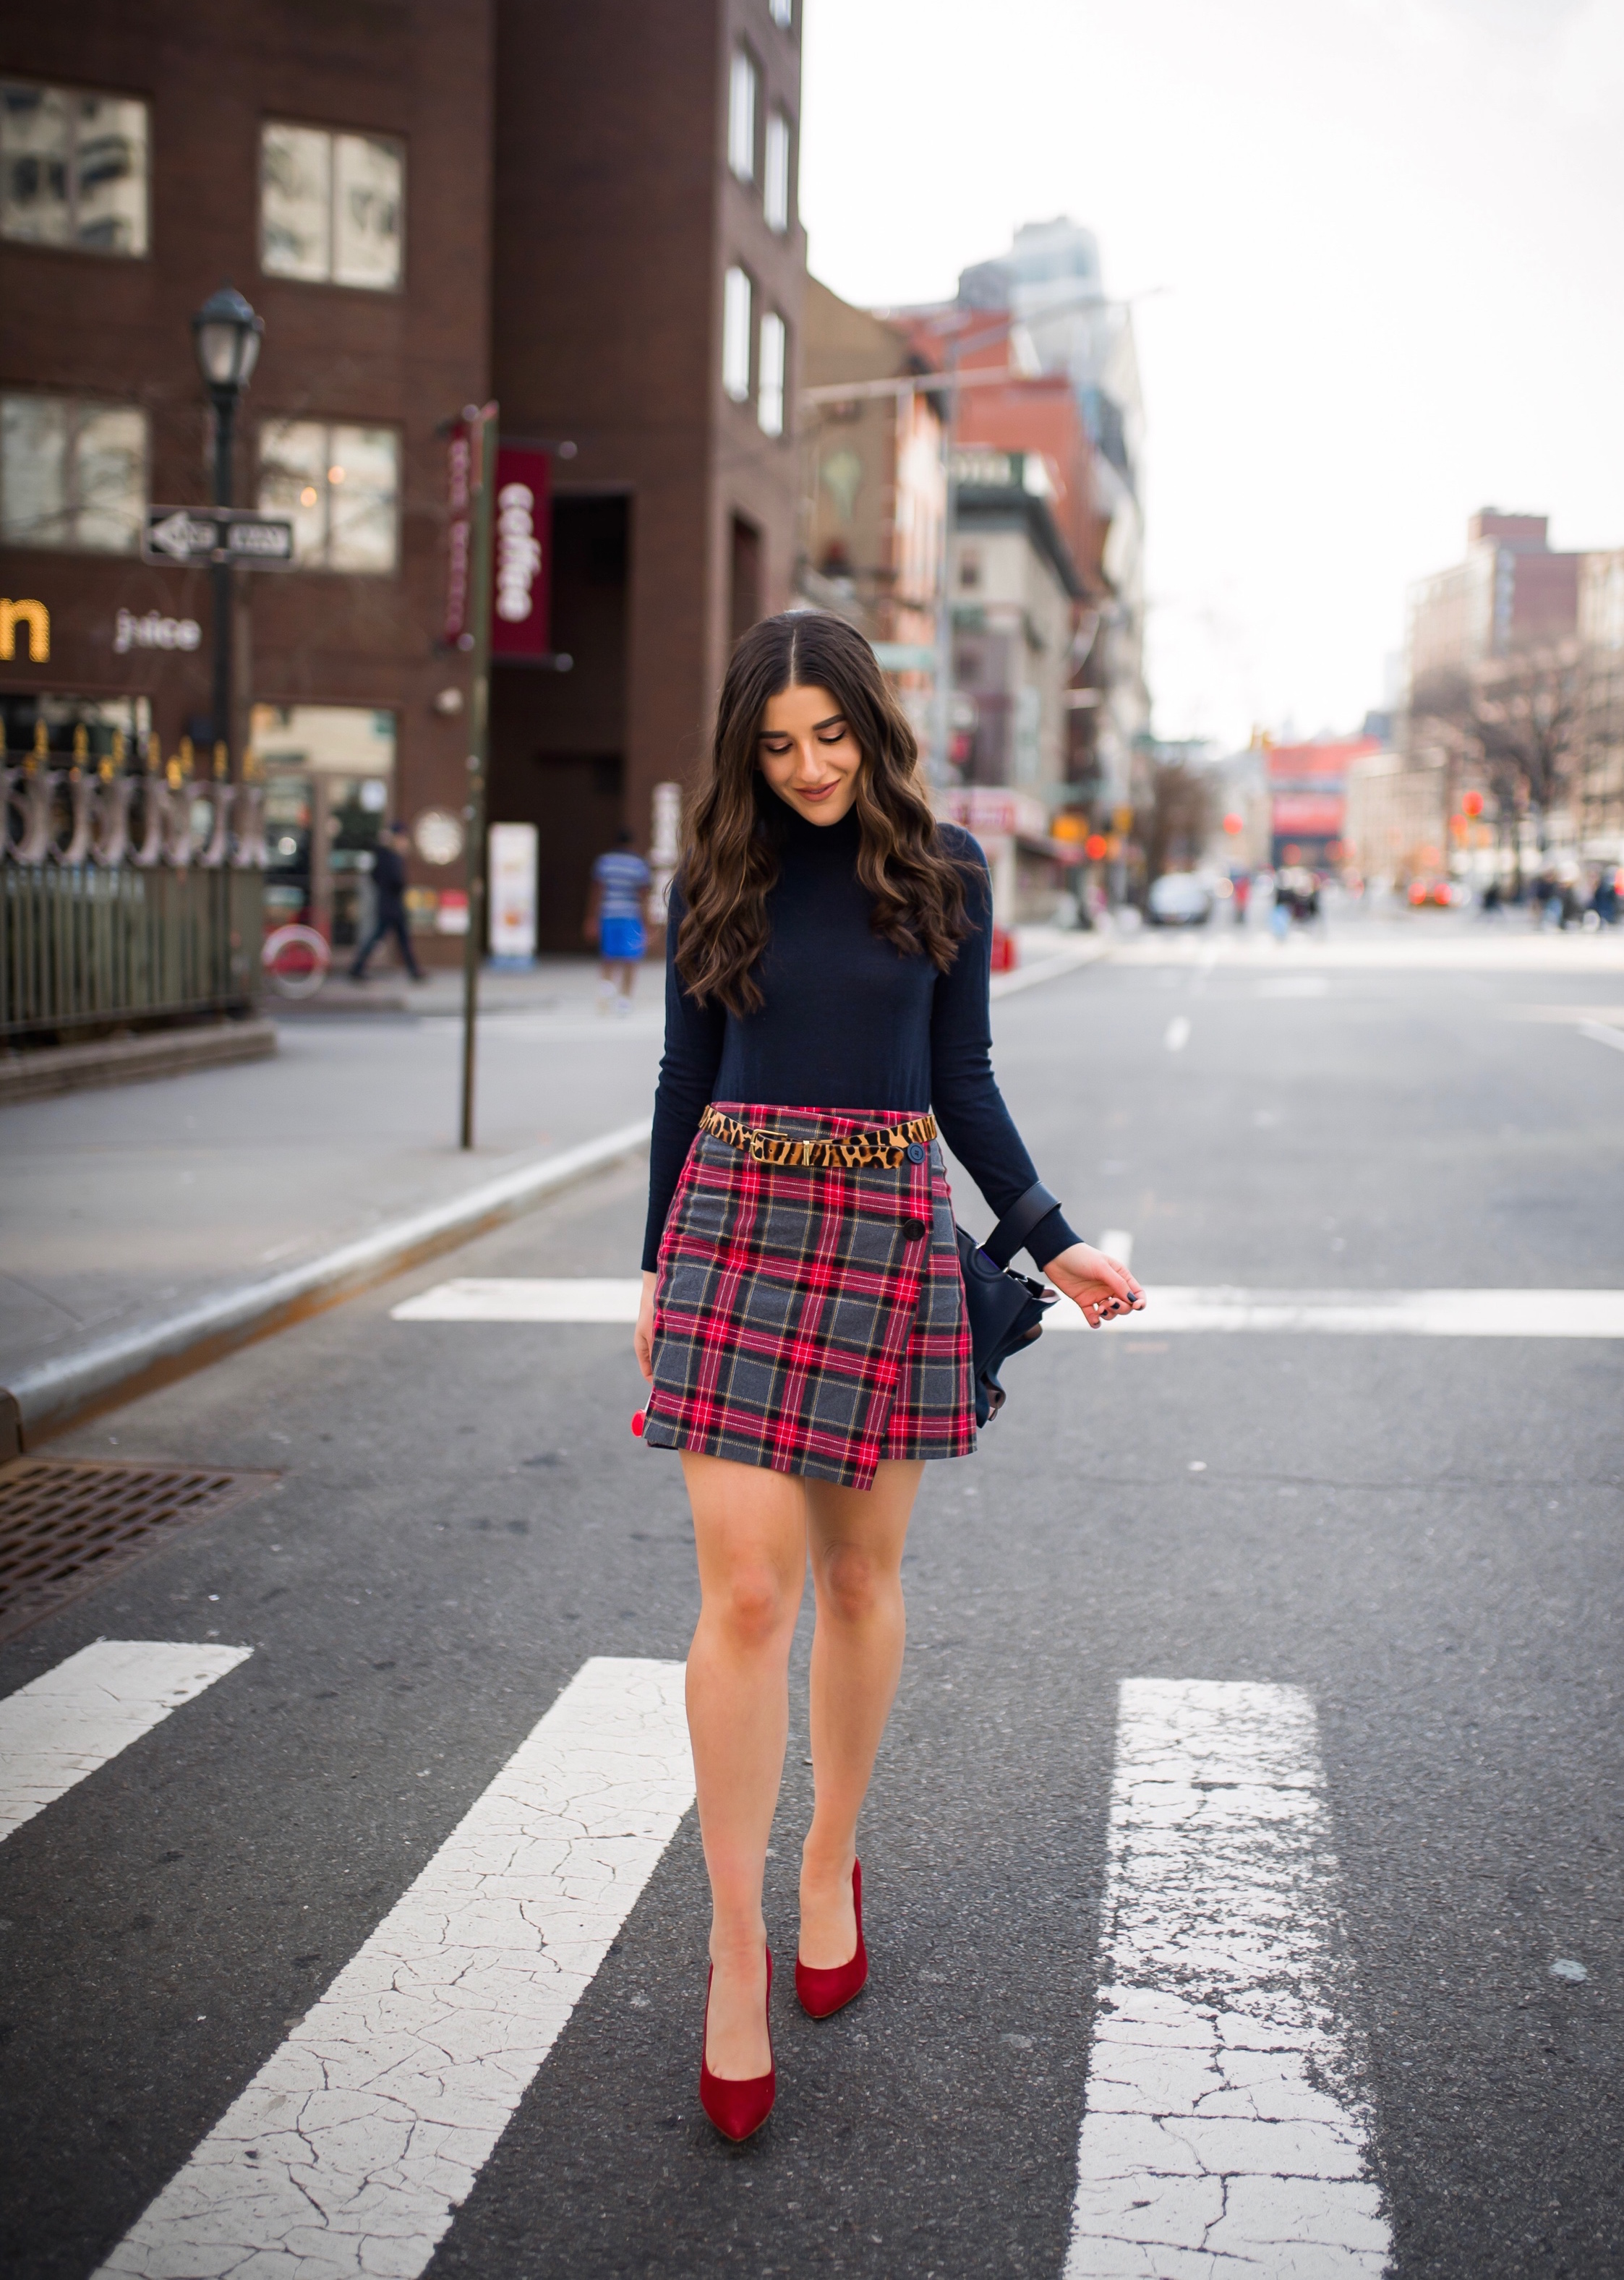 How NYFW Changed From My 1st To 12th Season Plaid Skirt Red Heels Esther Santer Fashion Blog NYC Street Style Blogger Outfit OOTD Trendy Shopping Navy Turtleneck Hair Goals Wear Winter Fall Shop Jcrew H&M Banana Republic Leopard Belt  Accessories Bag.jpg